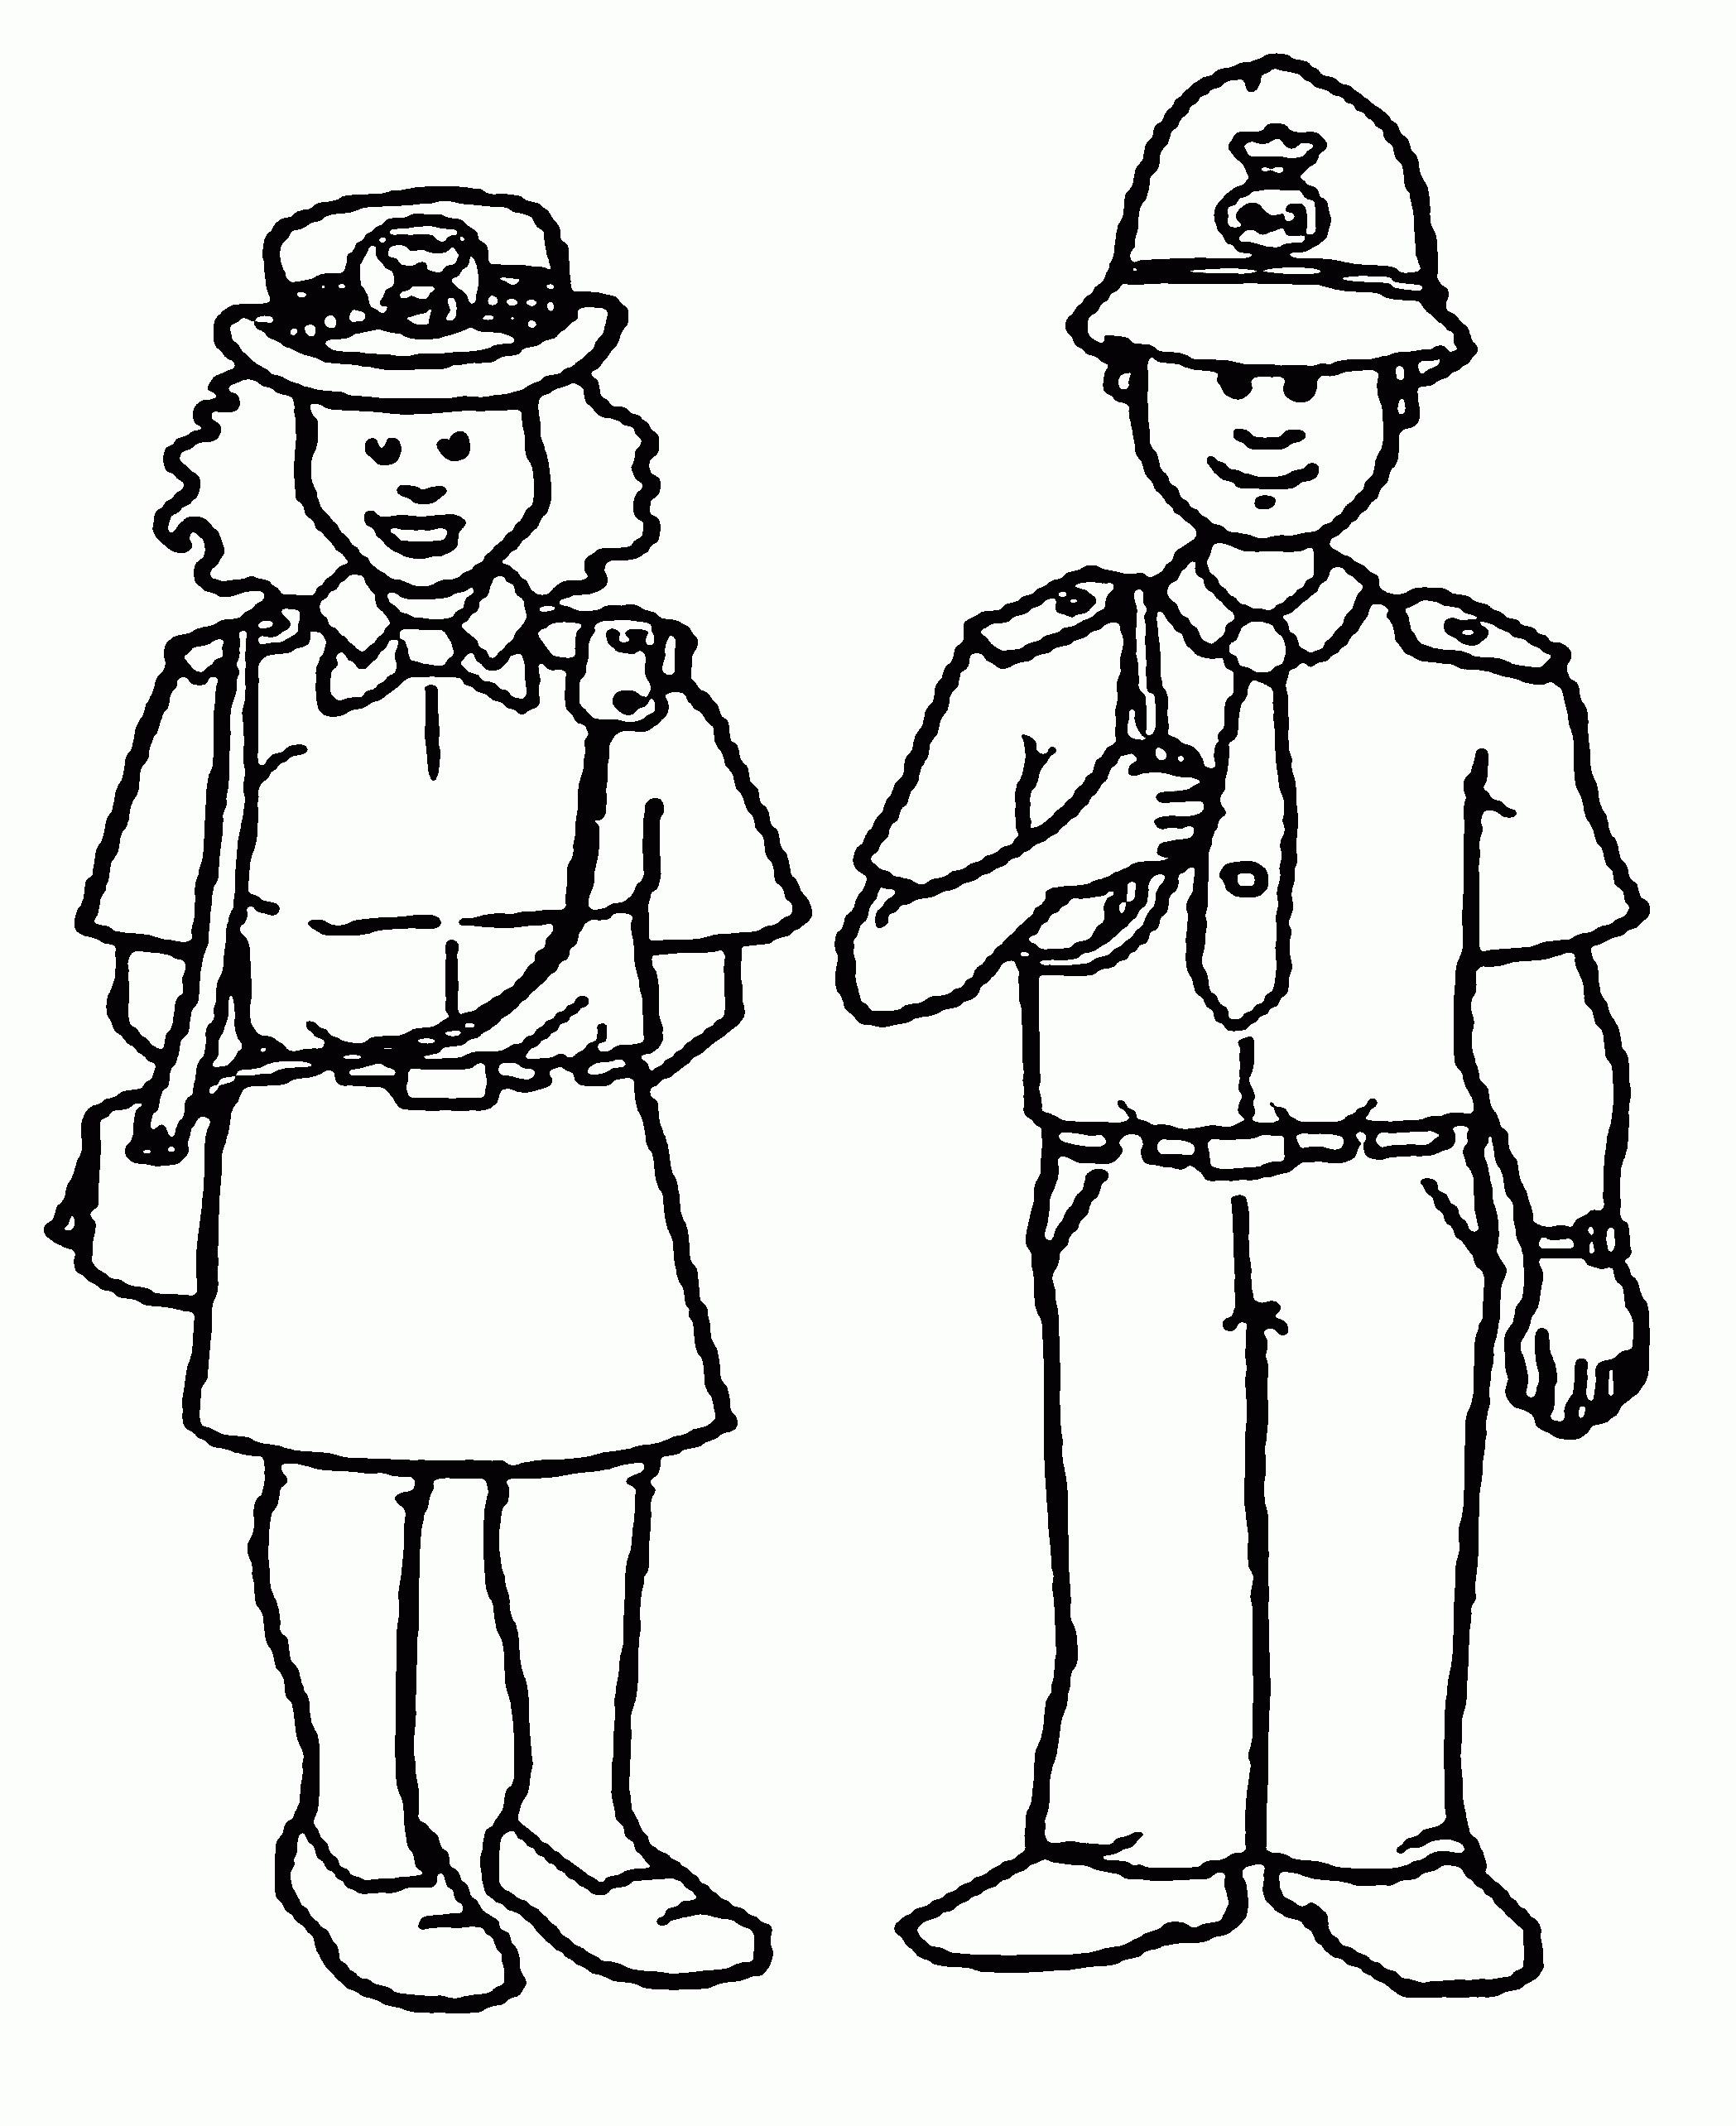 Guide Police Officer Coloring Page Free Printable Coloring Pages ...